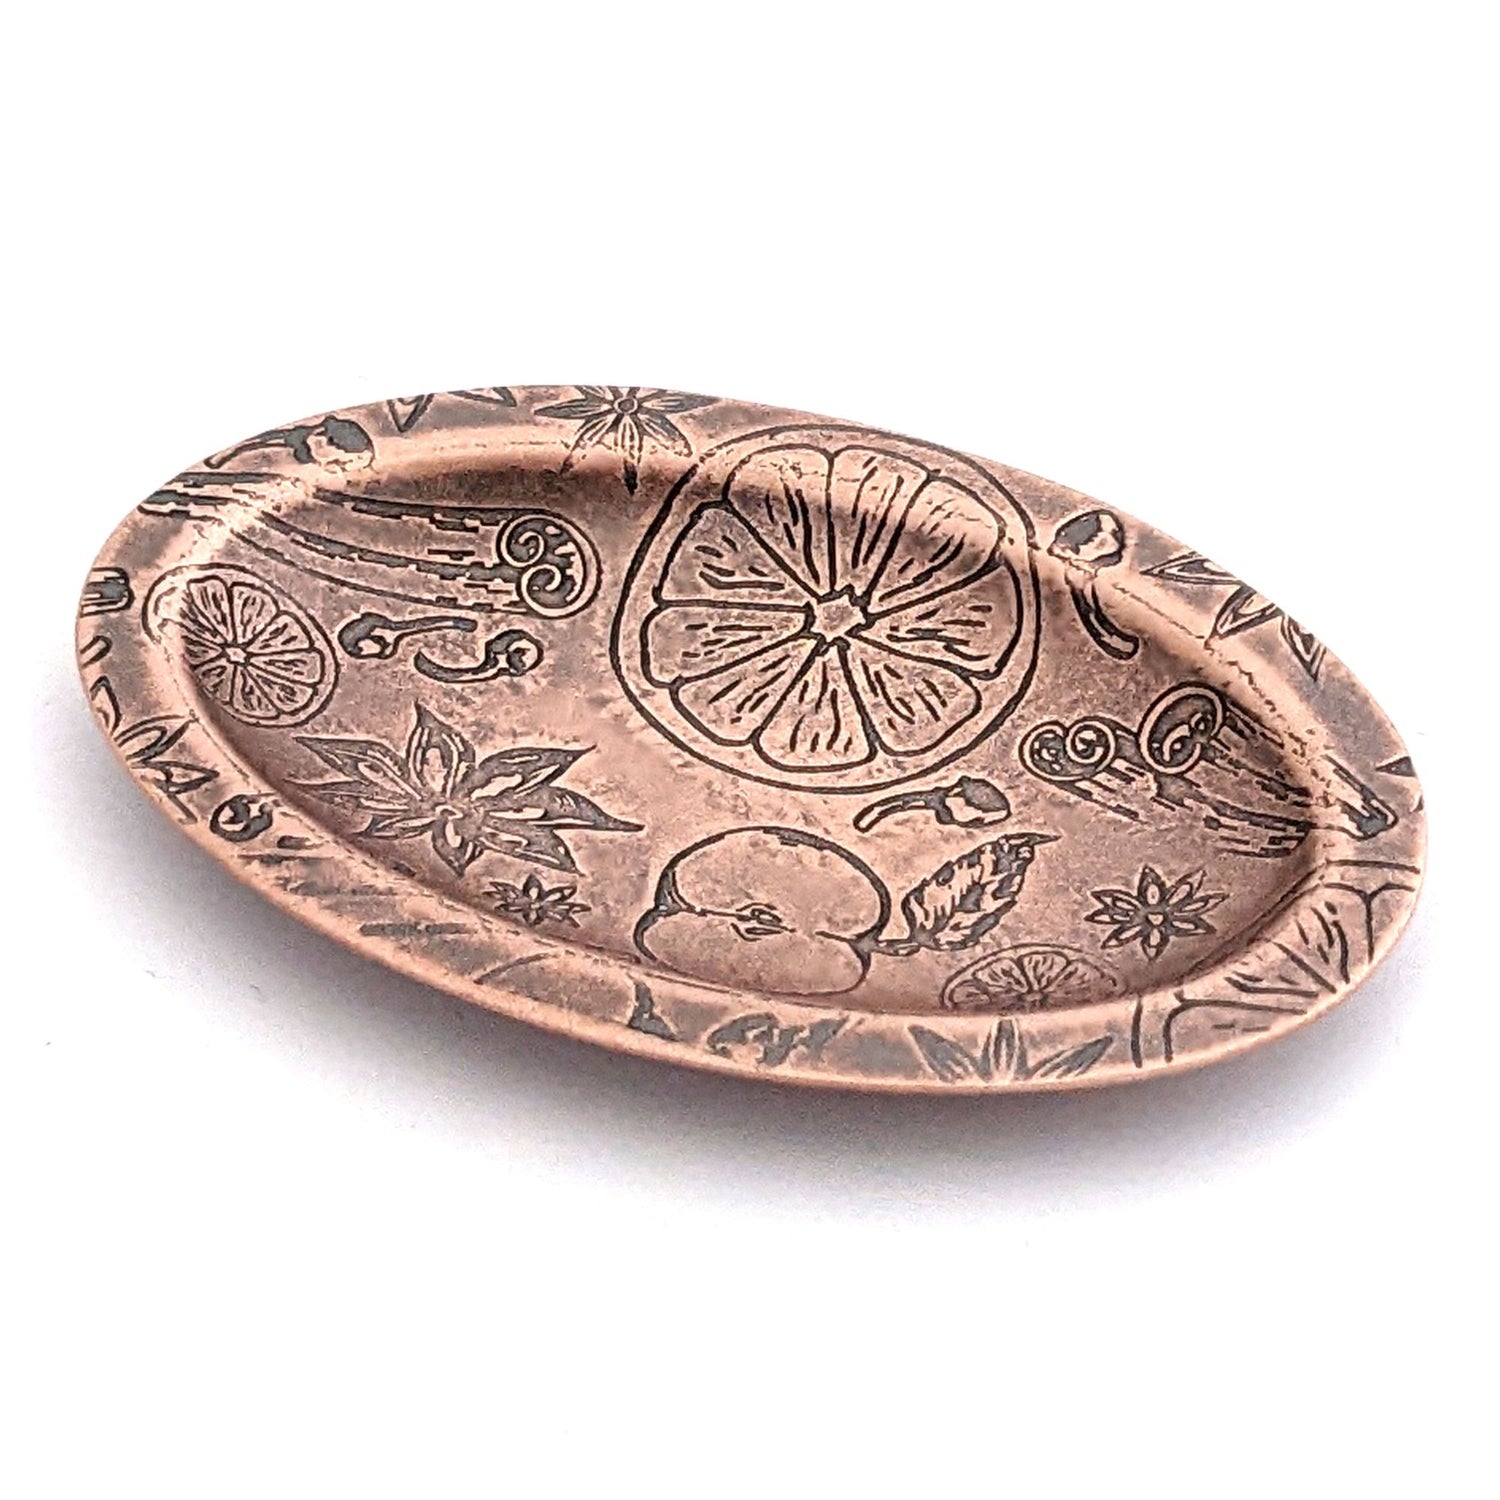 Copper oval ring dish with design of ingredients used in winter spice drinks, including apples oranges nutmeg cinnamon and clove.  Dish is 2 inches by three inches with a raised lip.